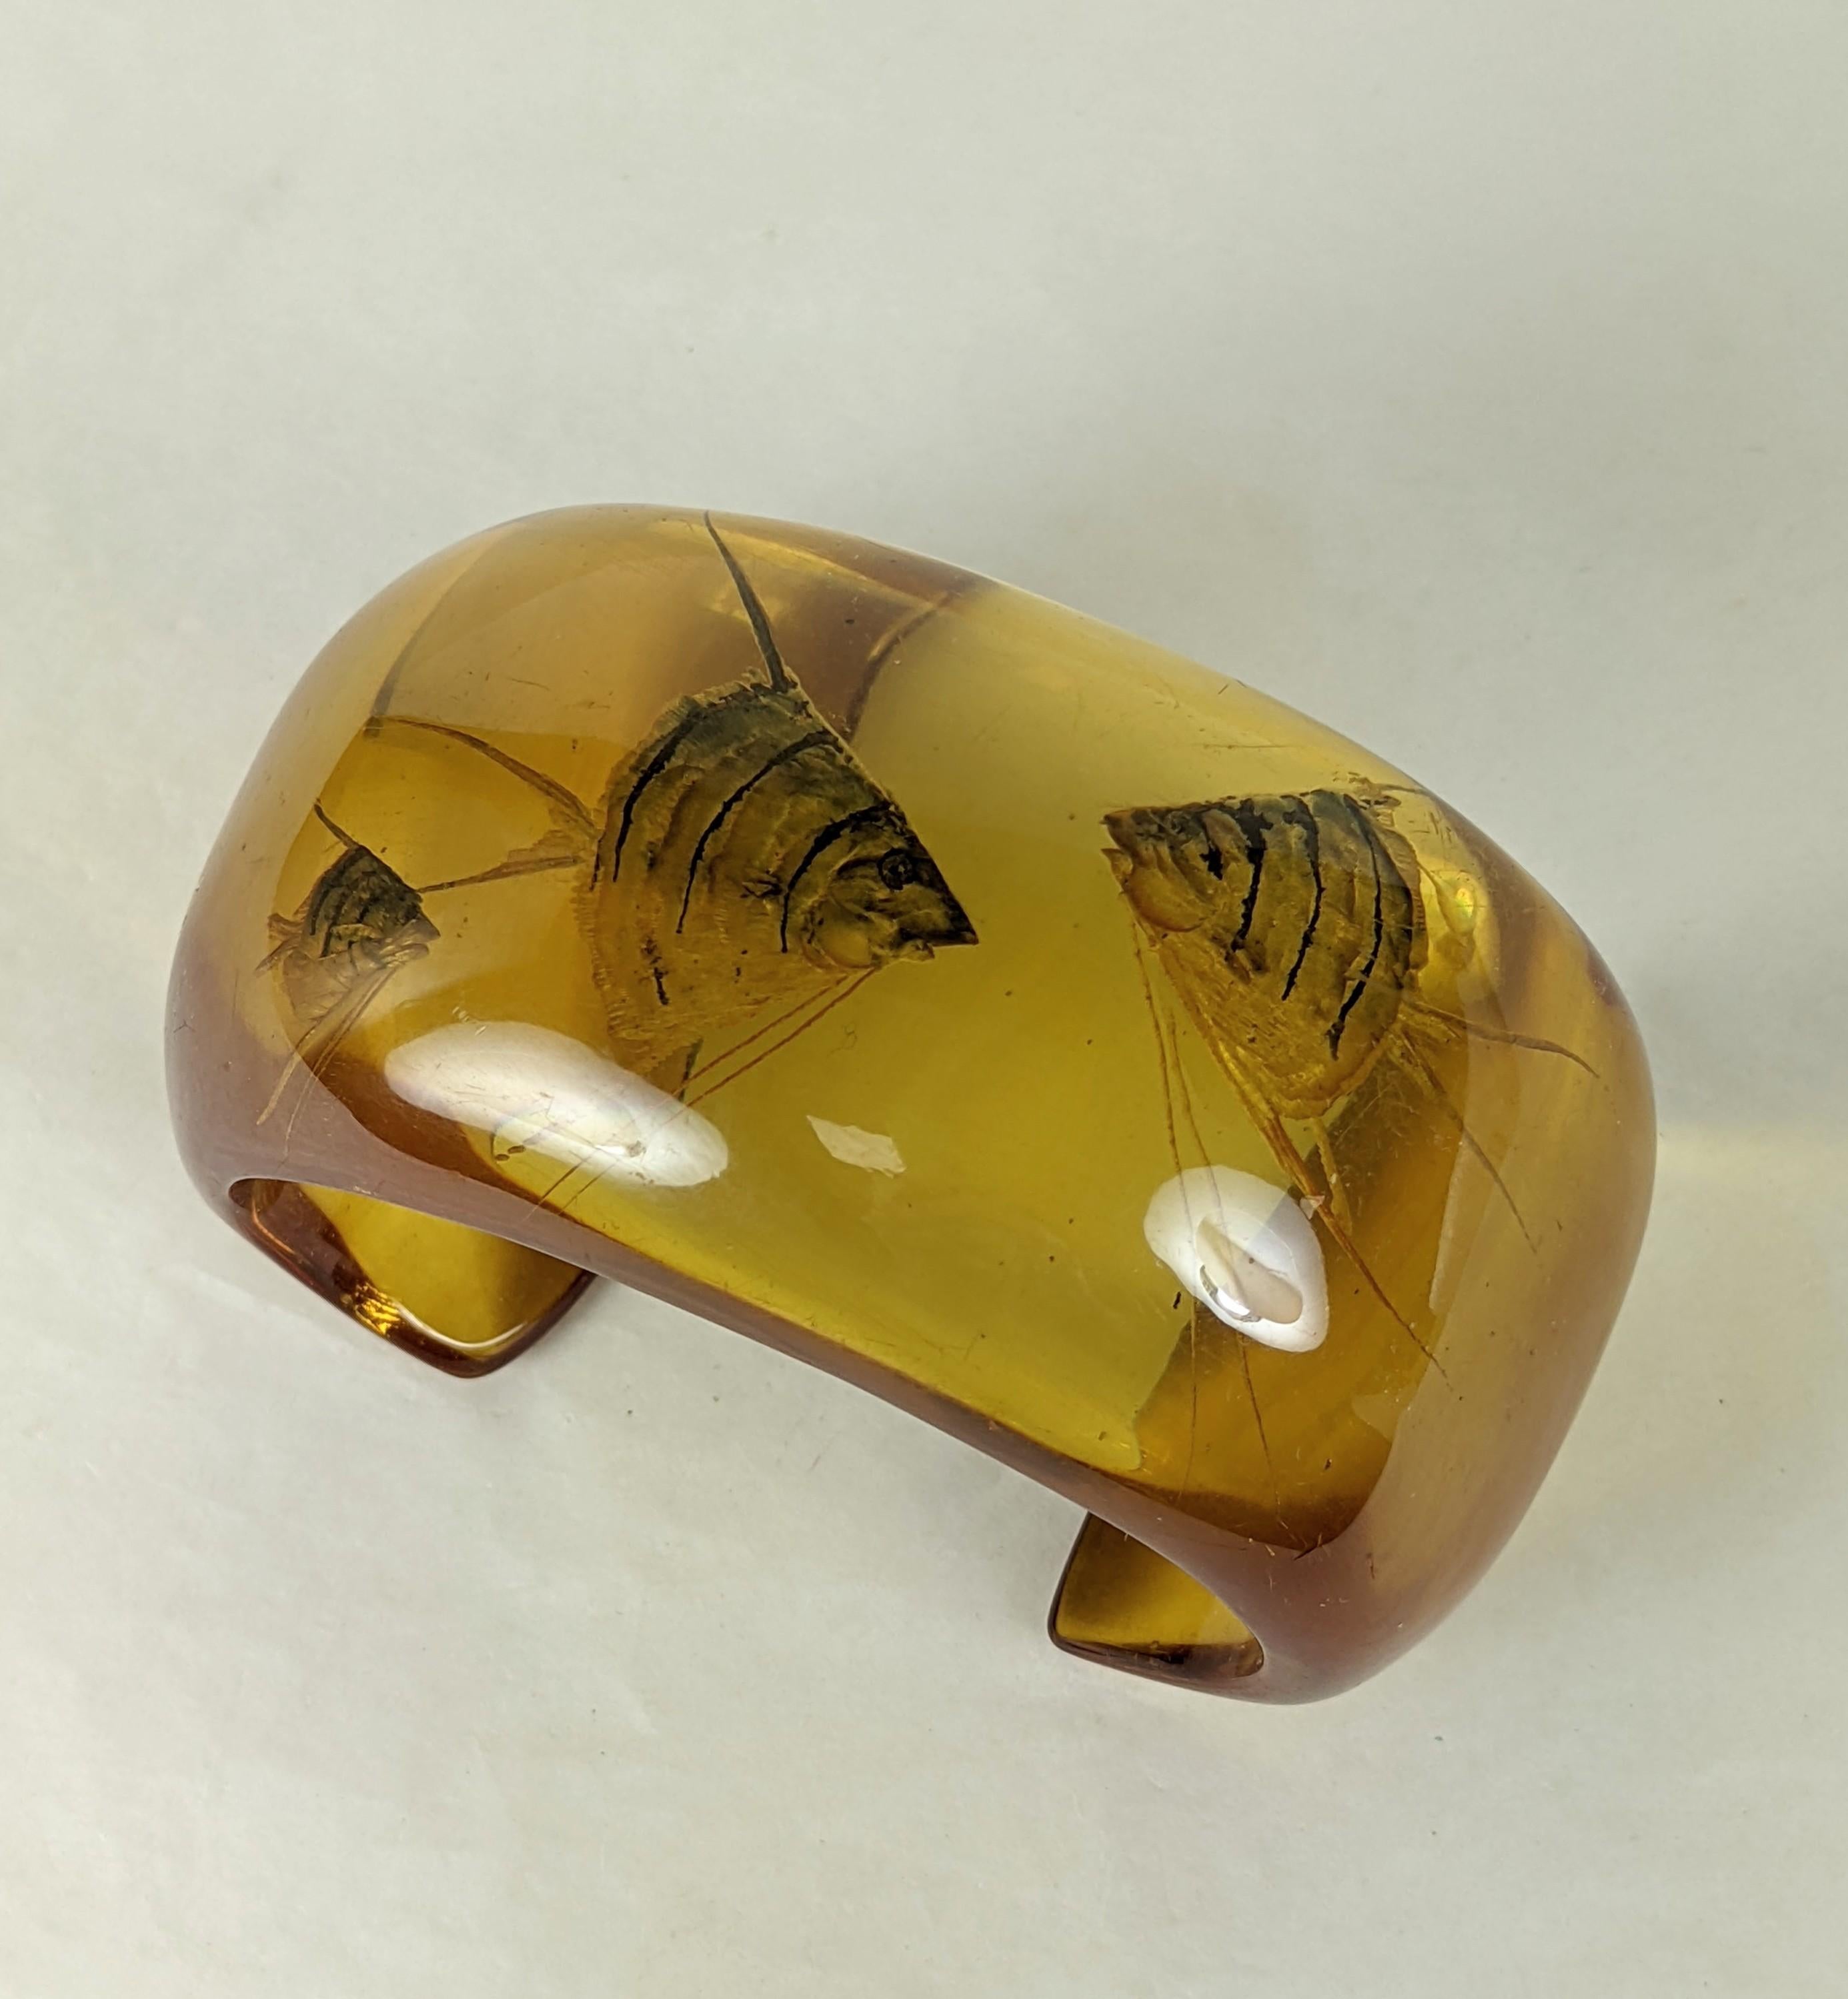 Exceptional and Rare Art Deco Reverse Carved Apple Juice Aquarium Bakelite Cuff from the 1930's. Reverse carved with 3 finely detailed angelfish which are then realistically overpainted in mother of pearl iridescent tones.  1 5/8